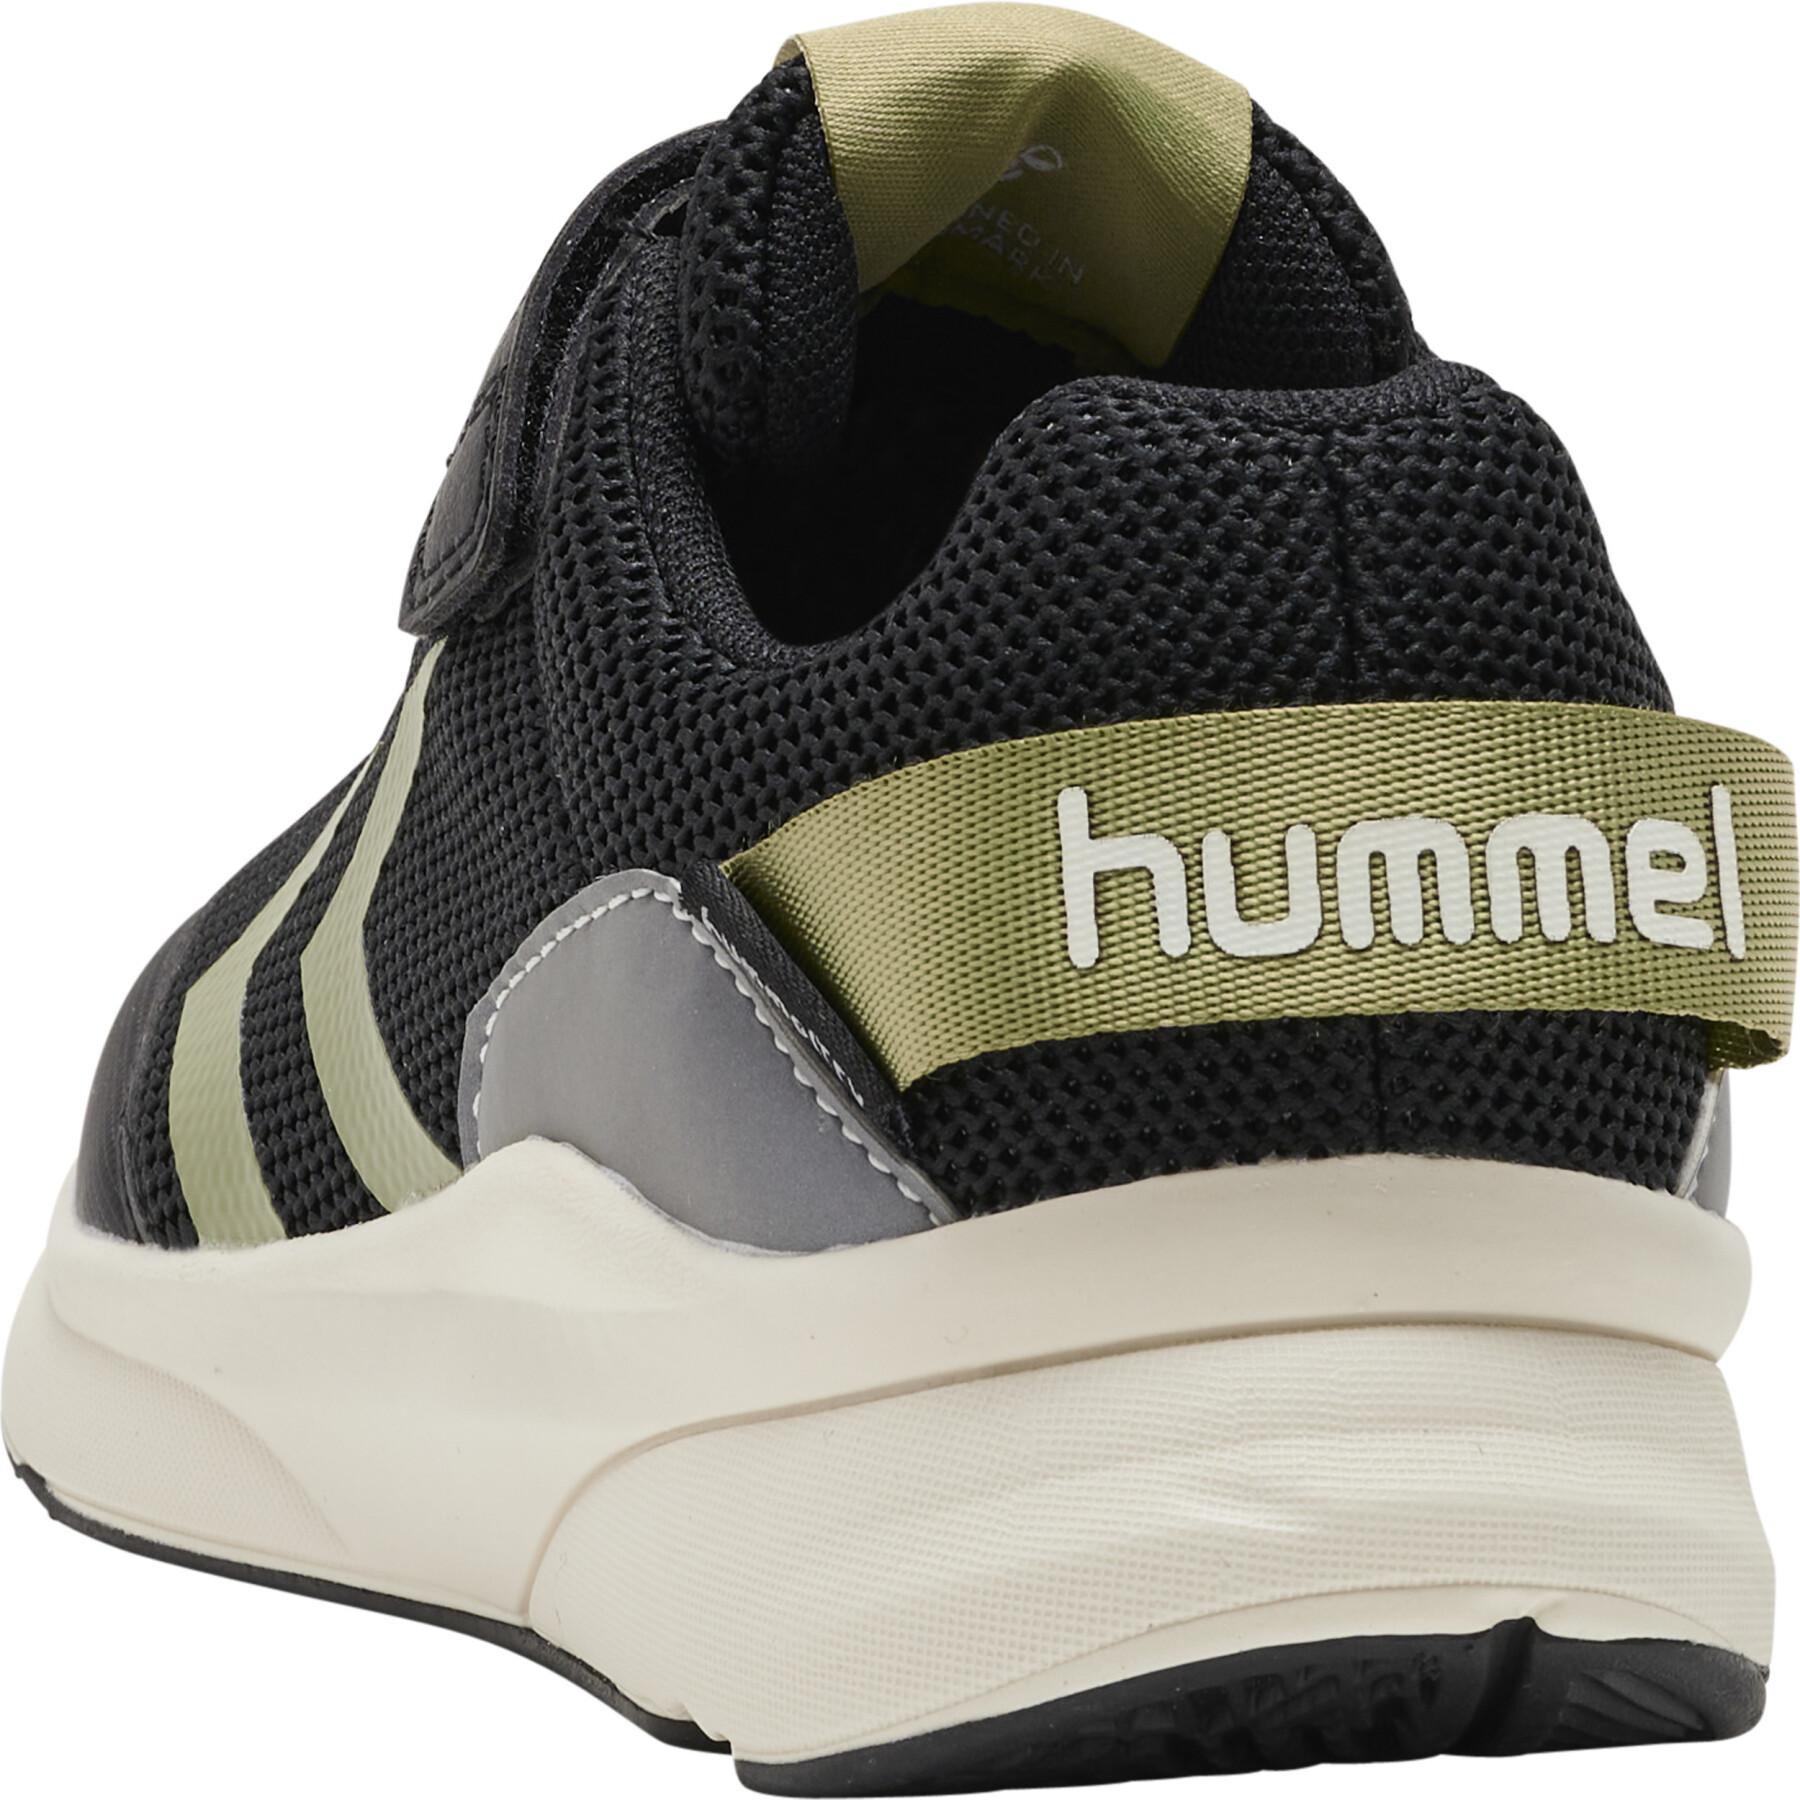 Children's sneakers Hummel Reach 250 Recycled Tex